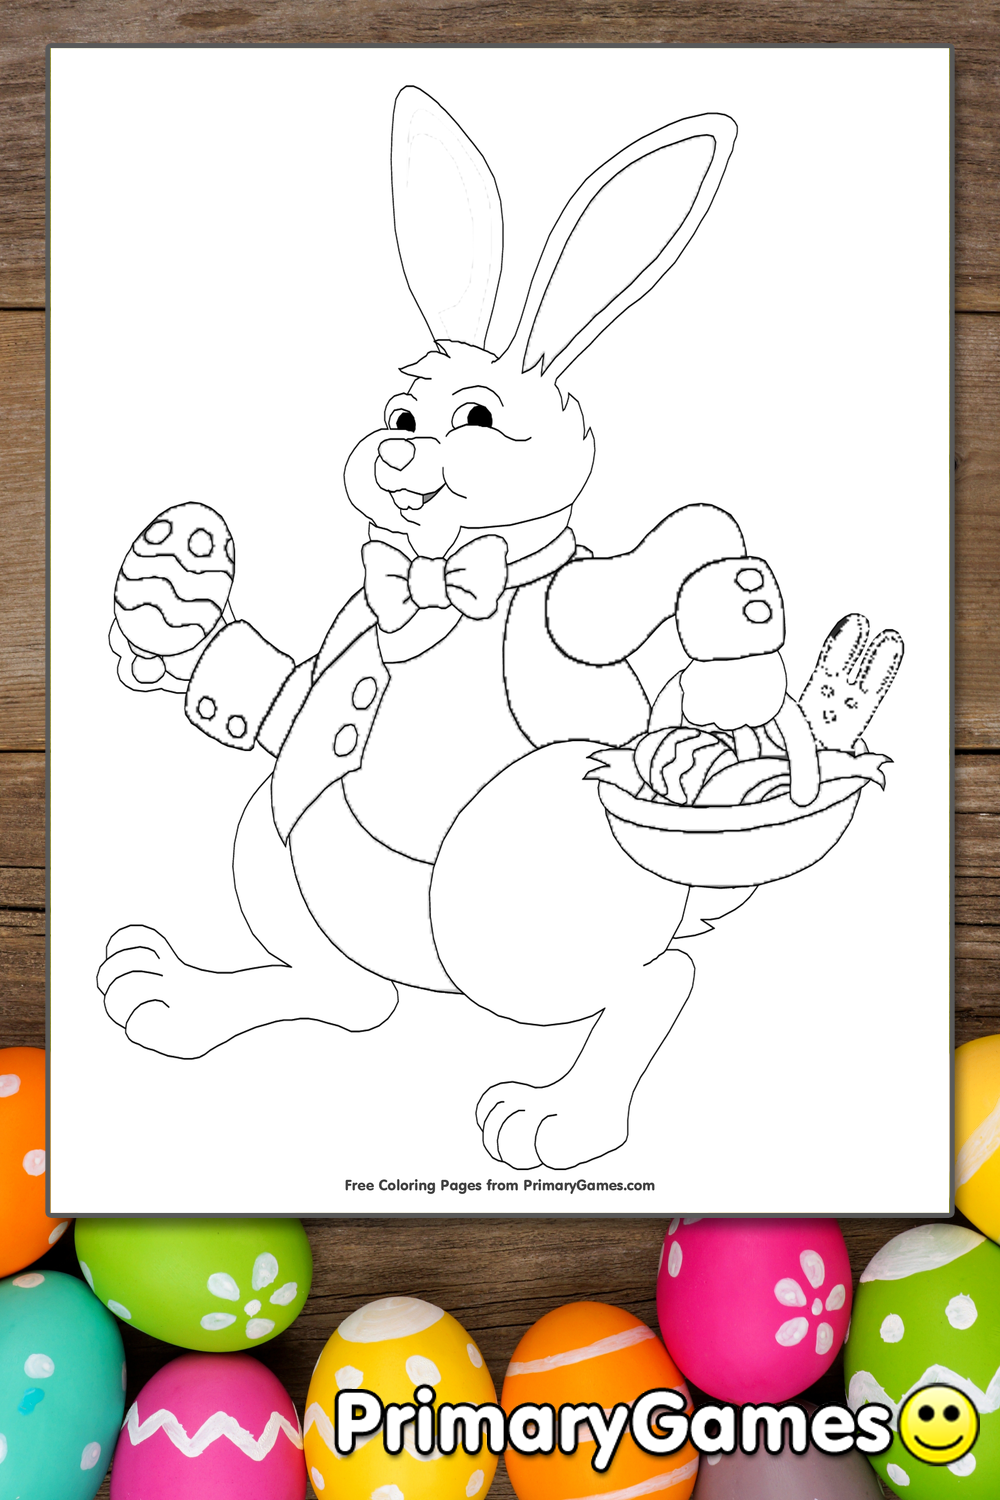 Easter Bunny Coloring Page | Printable Easter Coloring eBook - PrimaryGames